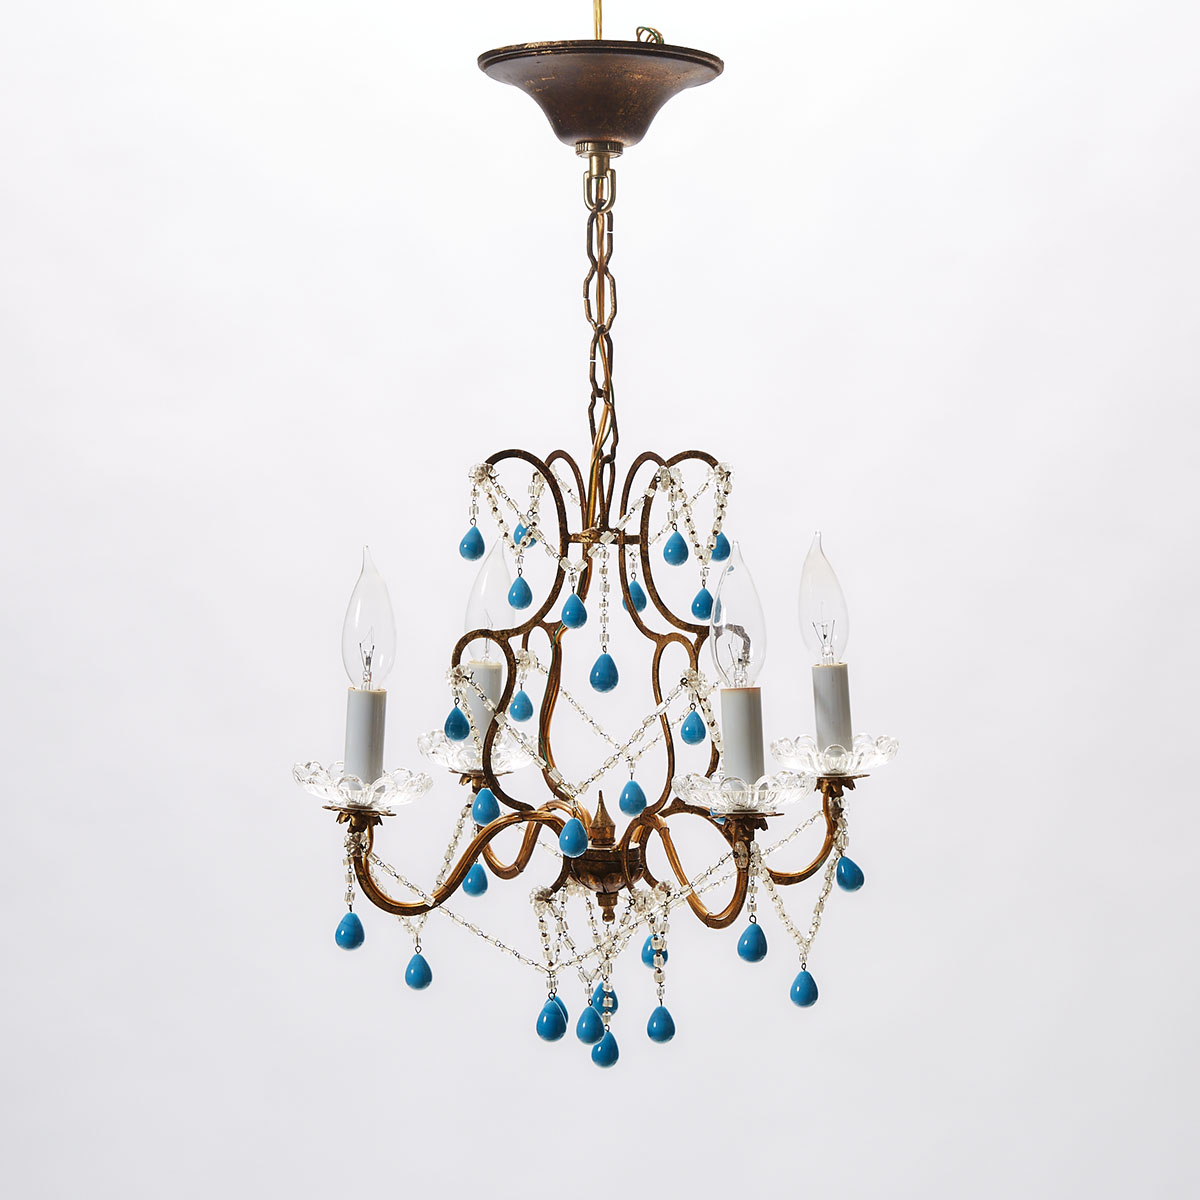 Small Four Light Gilt Metal Chandelier, mid 20th century